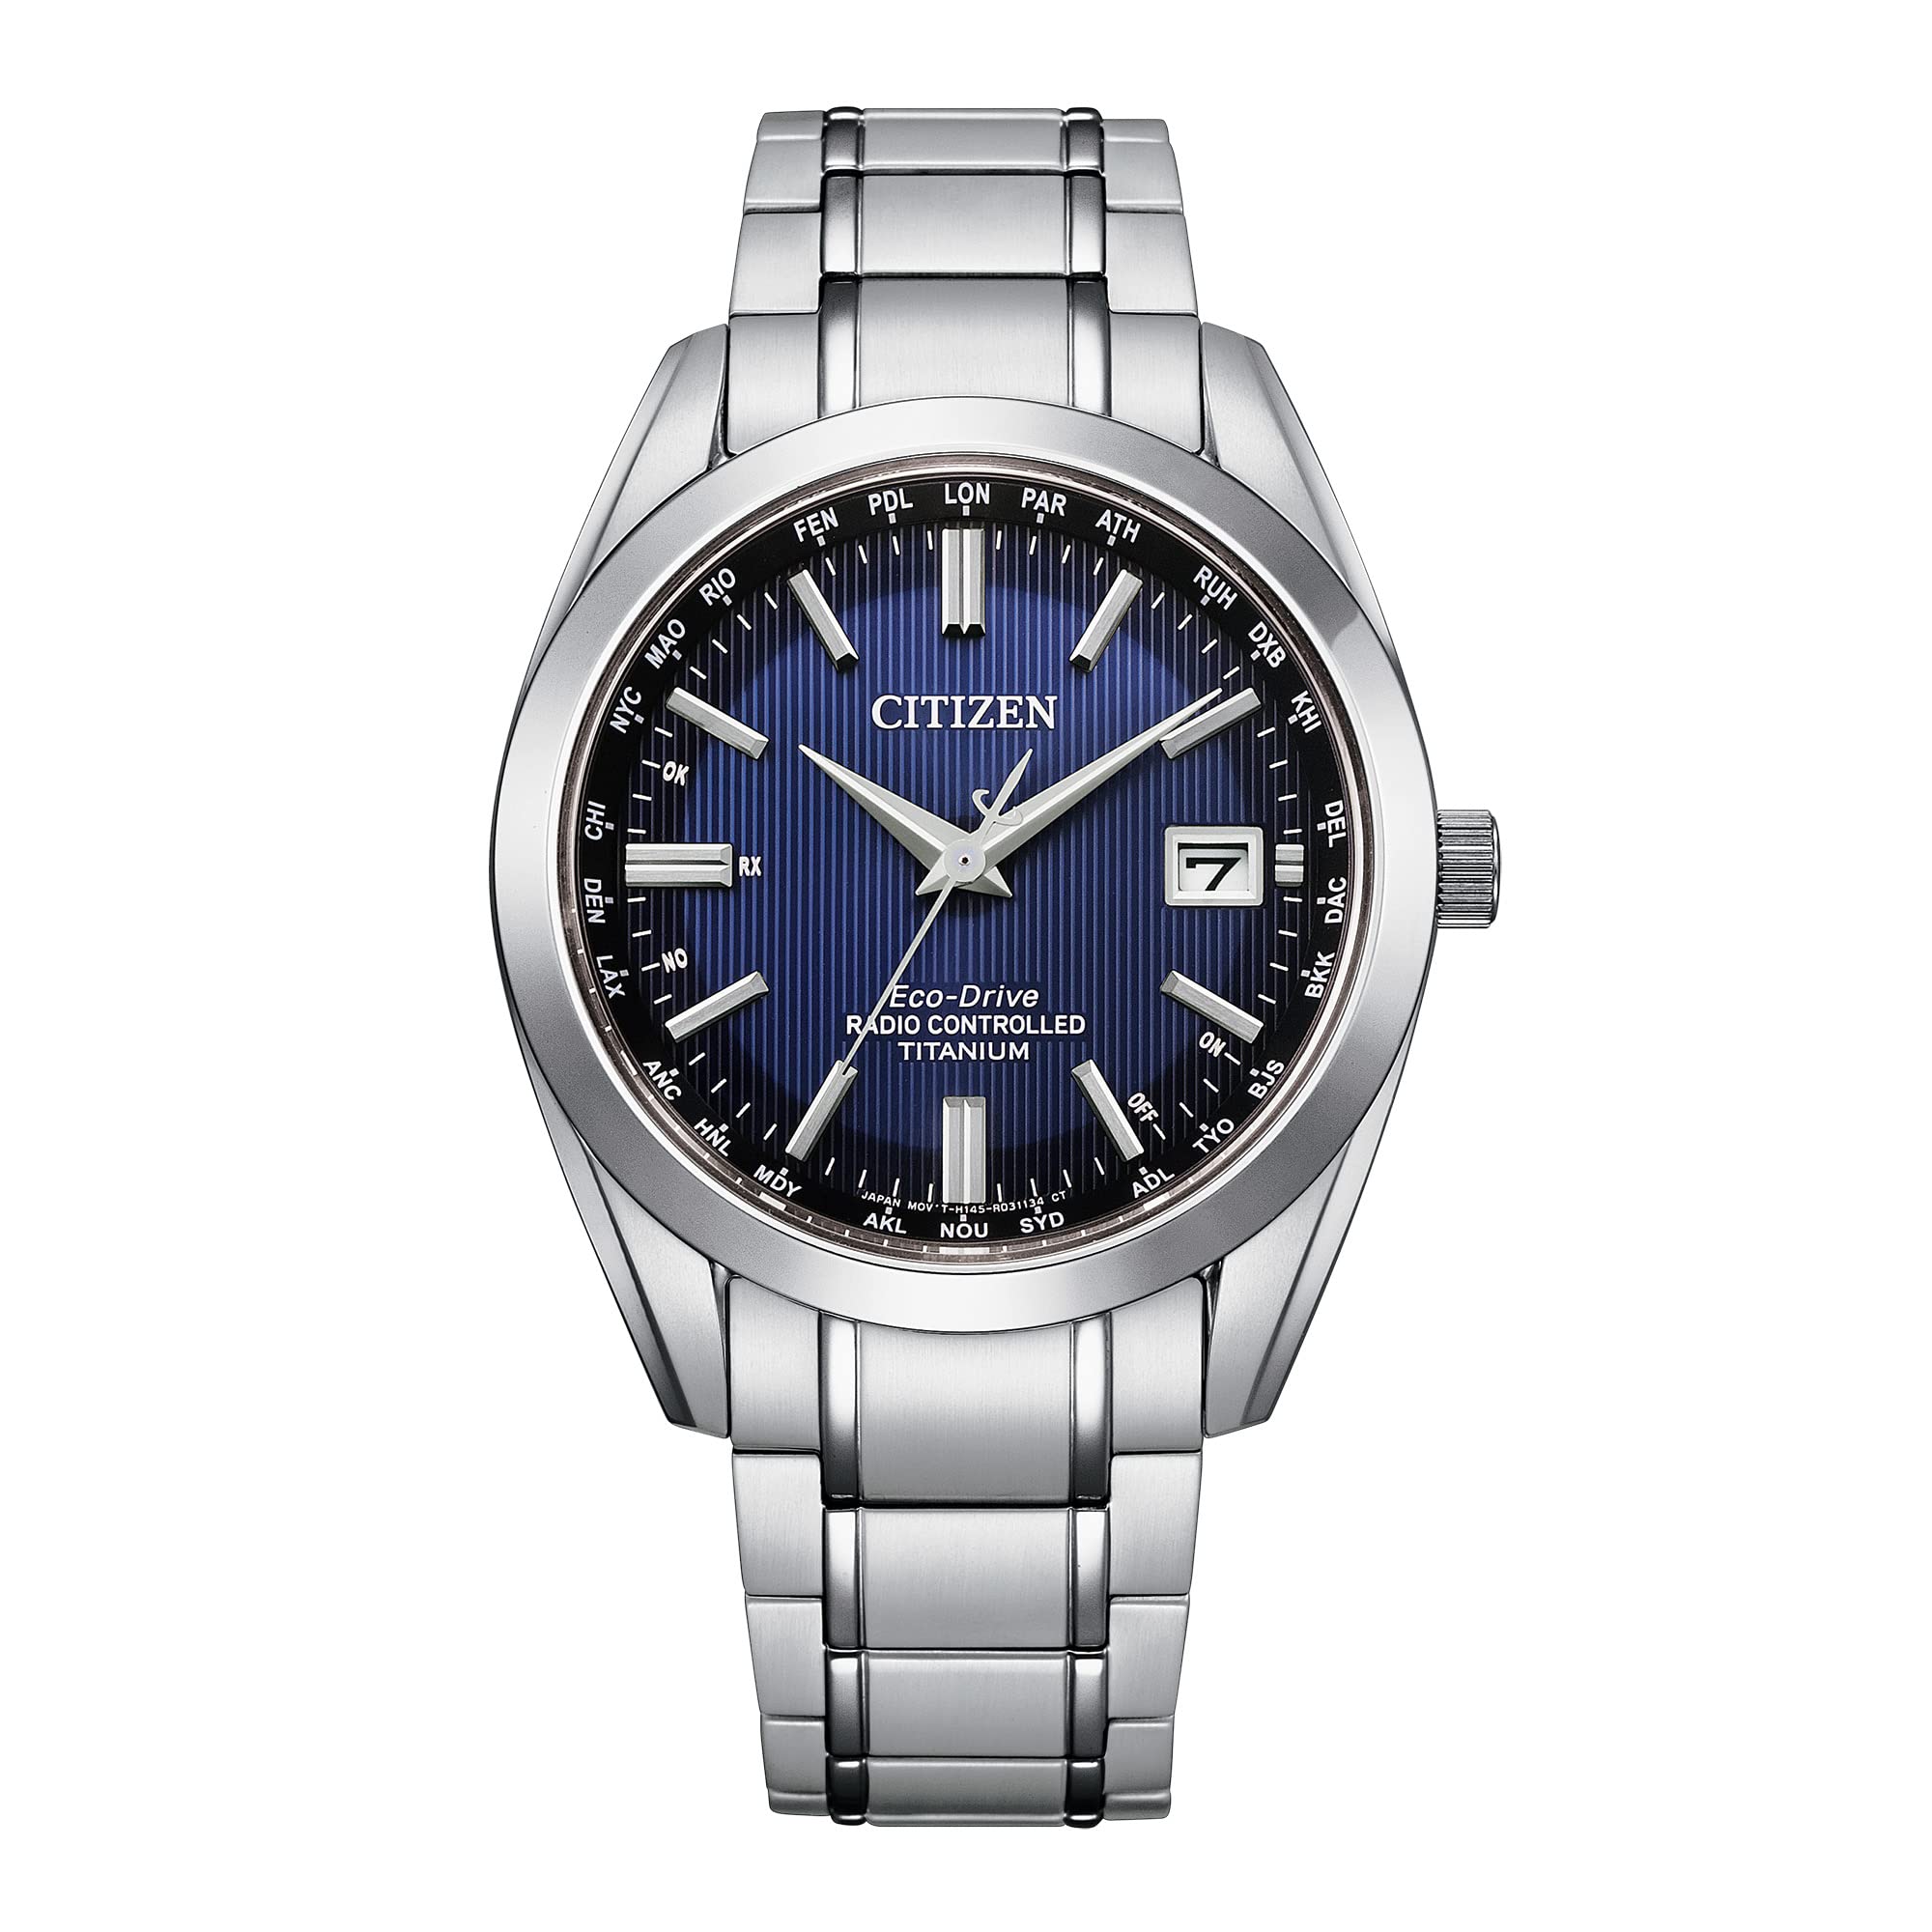 Citizen Men's Eco-Drive Classic Watch in Super Titanium with Atomic Timekeeping Technology, Blue Dial, 3-Hand Date and Sapphire Crystal (Model: CB0260-56L)